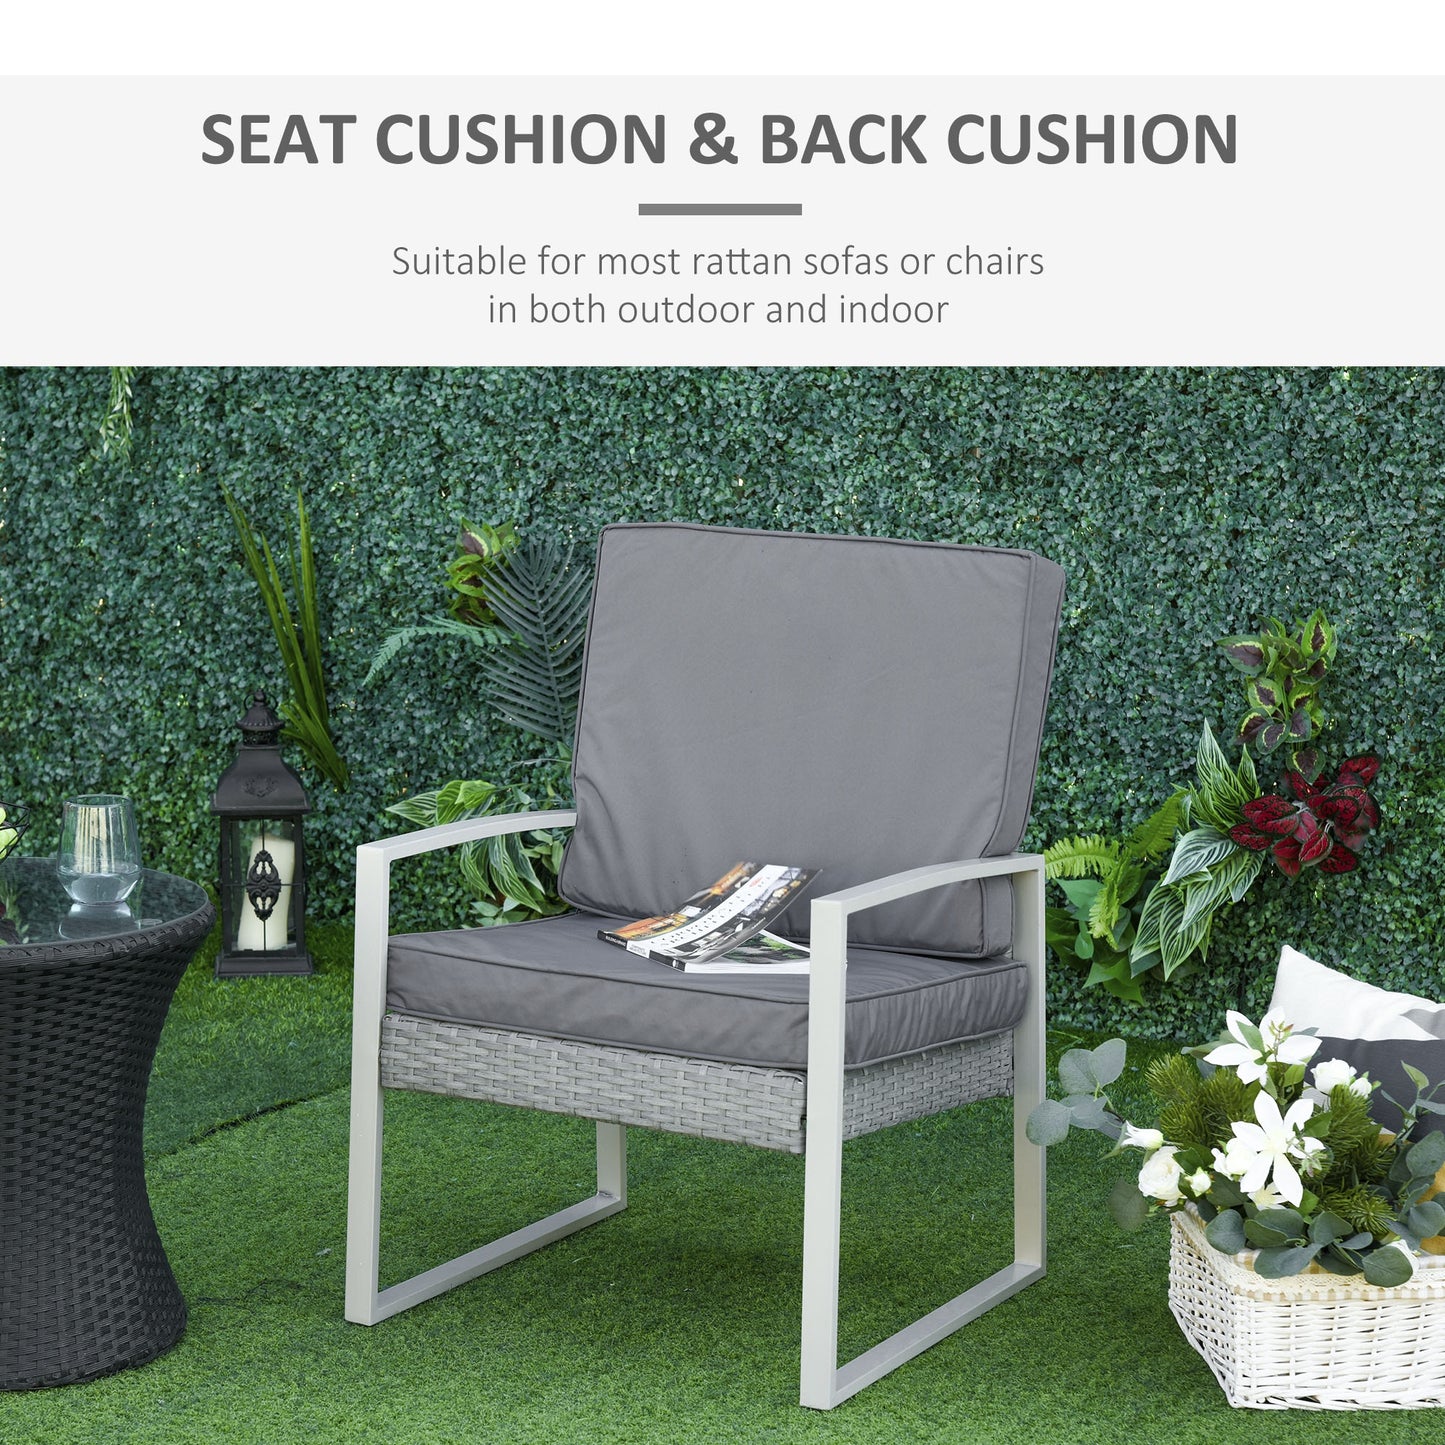 Outsunny 2 Piece Cushion Seat Cushion Back Pad for Rattan Furniture Indoor and Outdoor